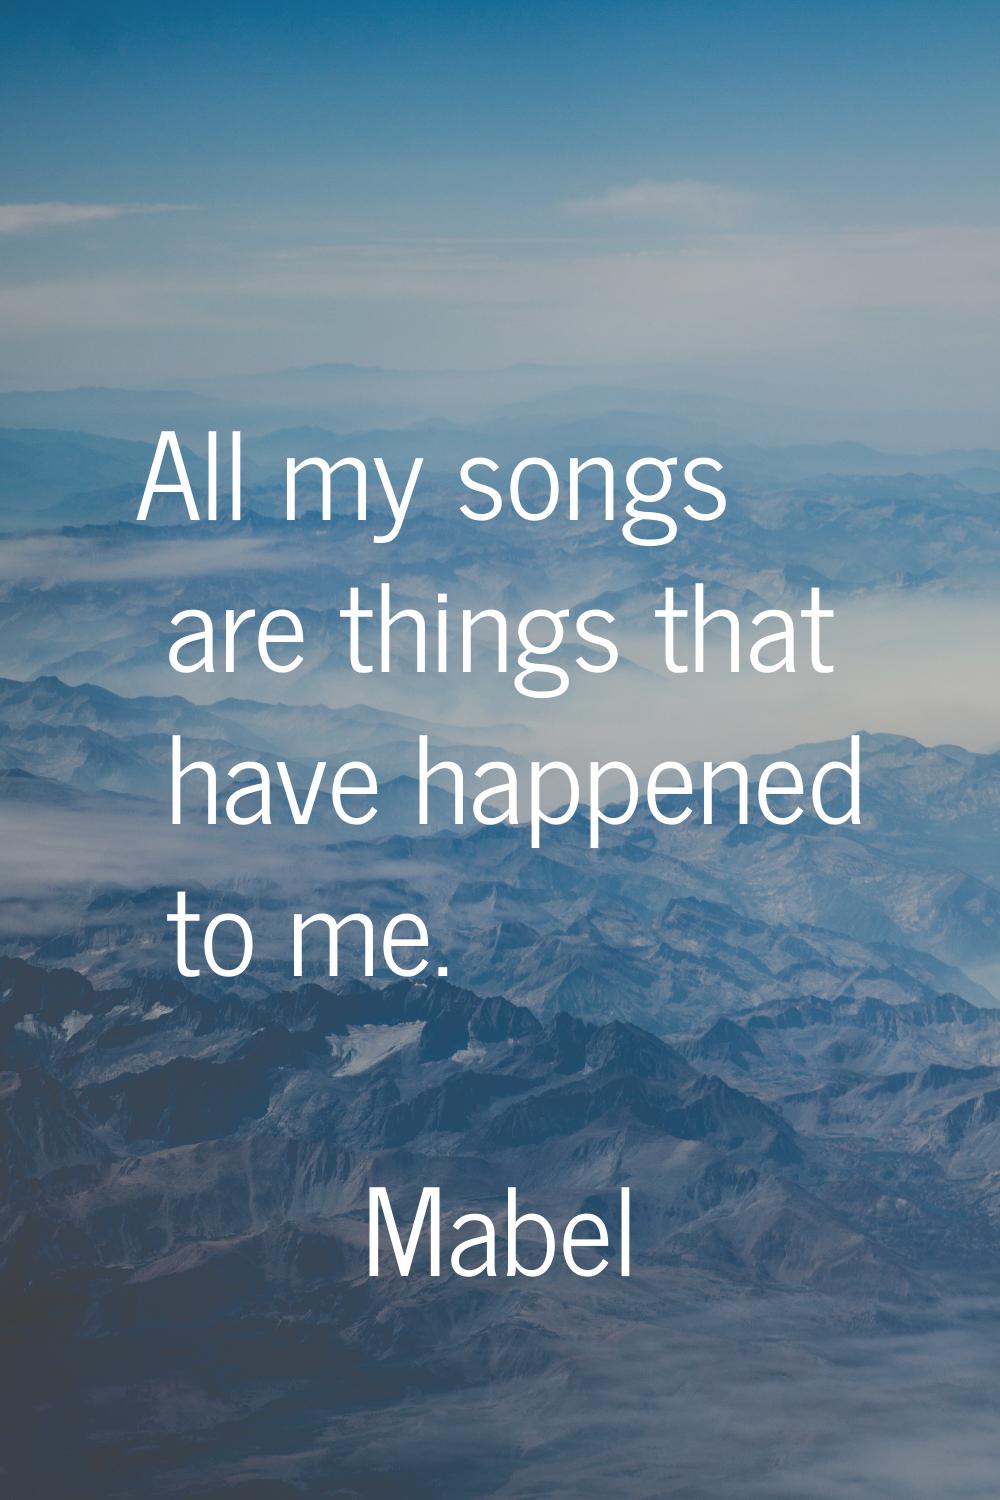 All my songs are things that have happened to me.